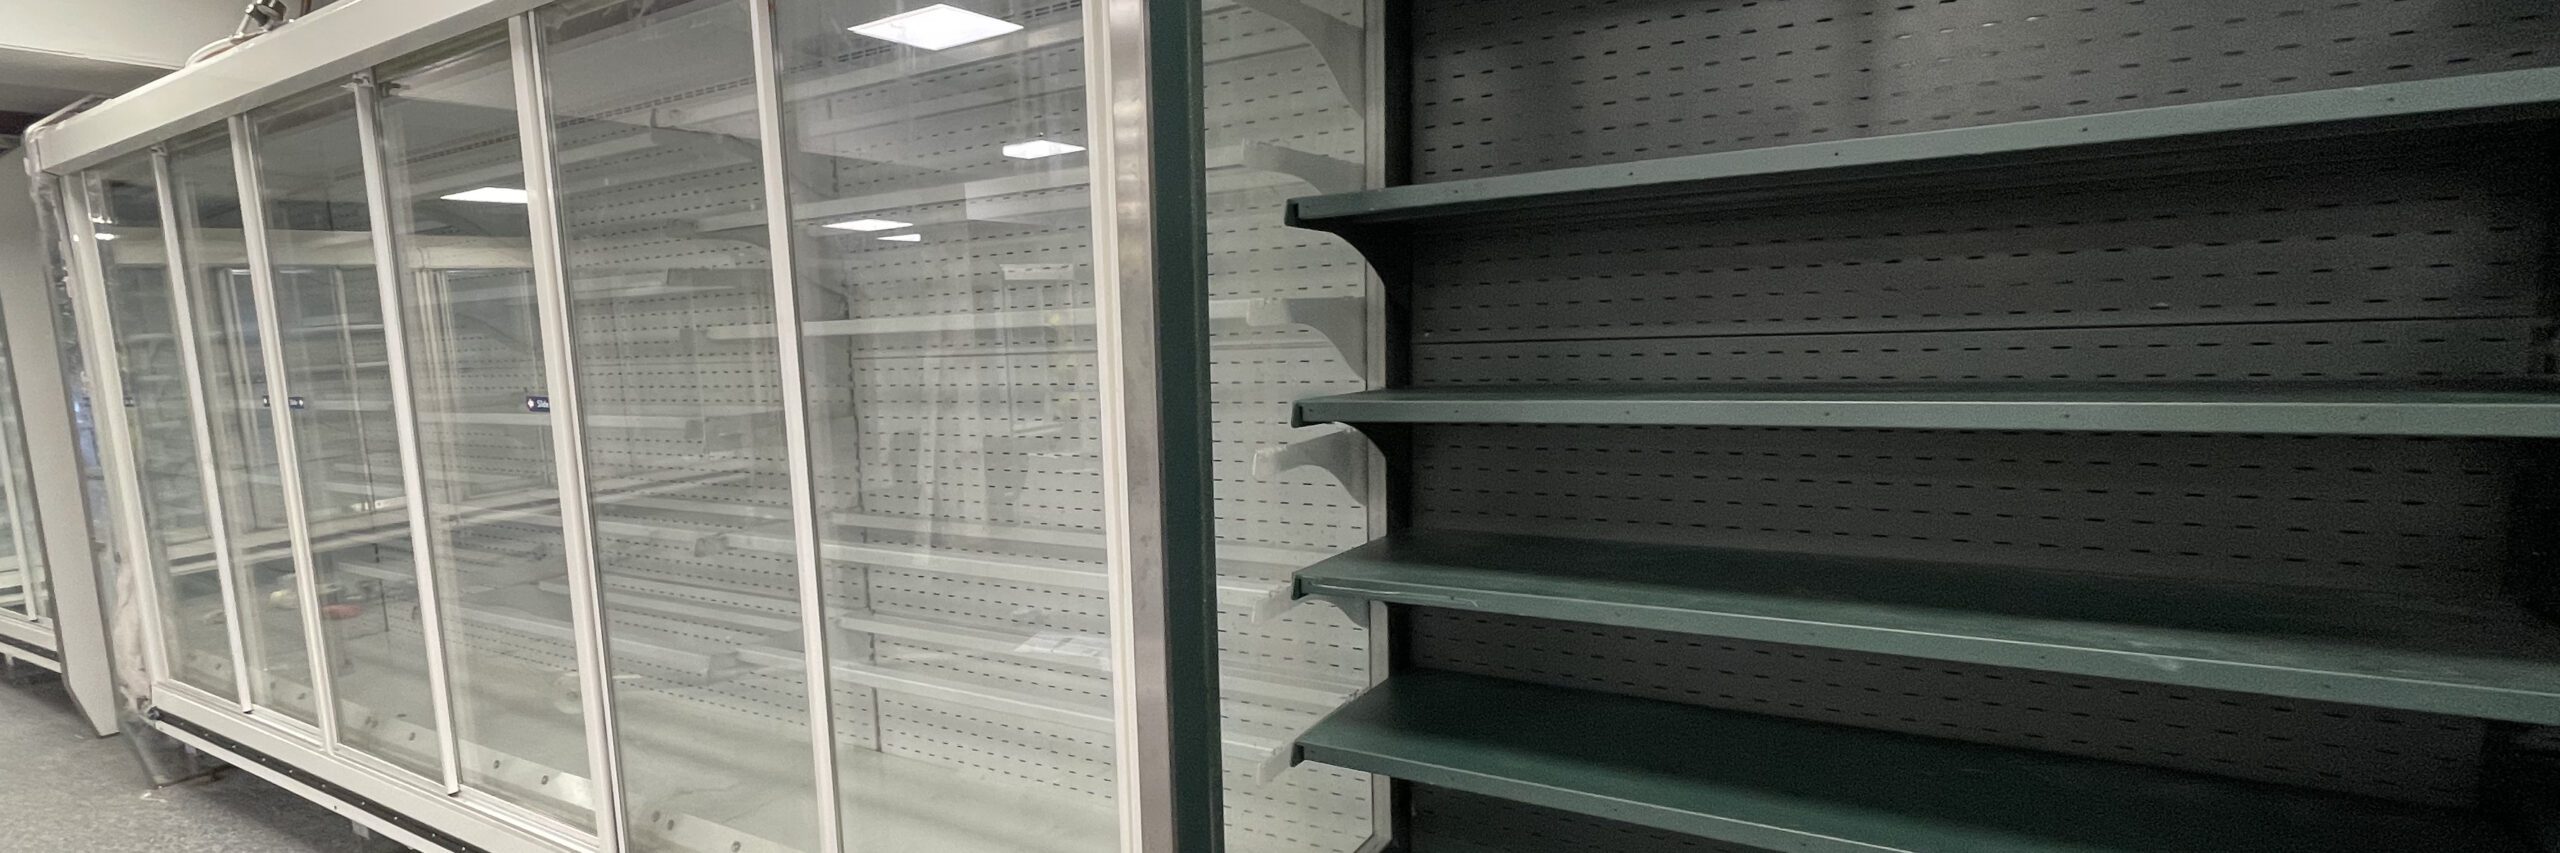 Refrigerated Display Cabinets | MTCSS